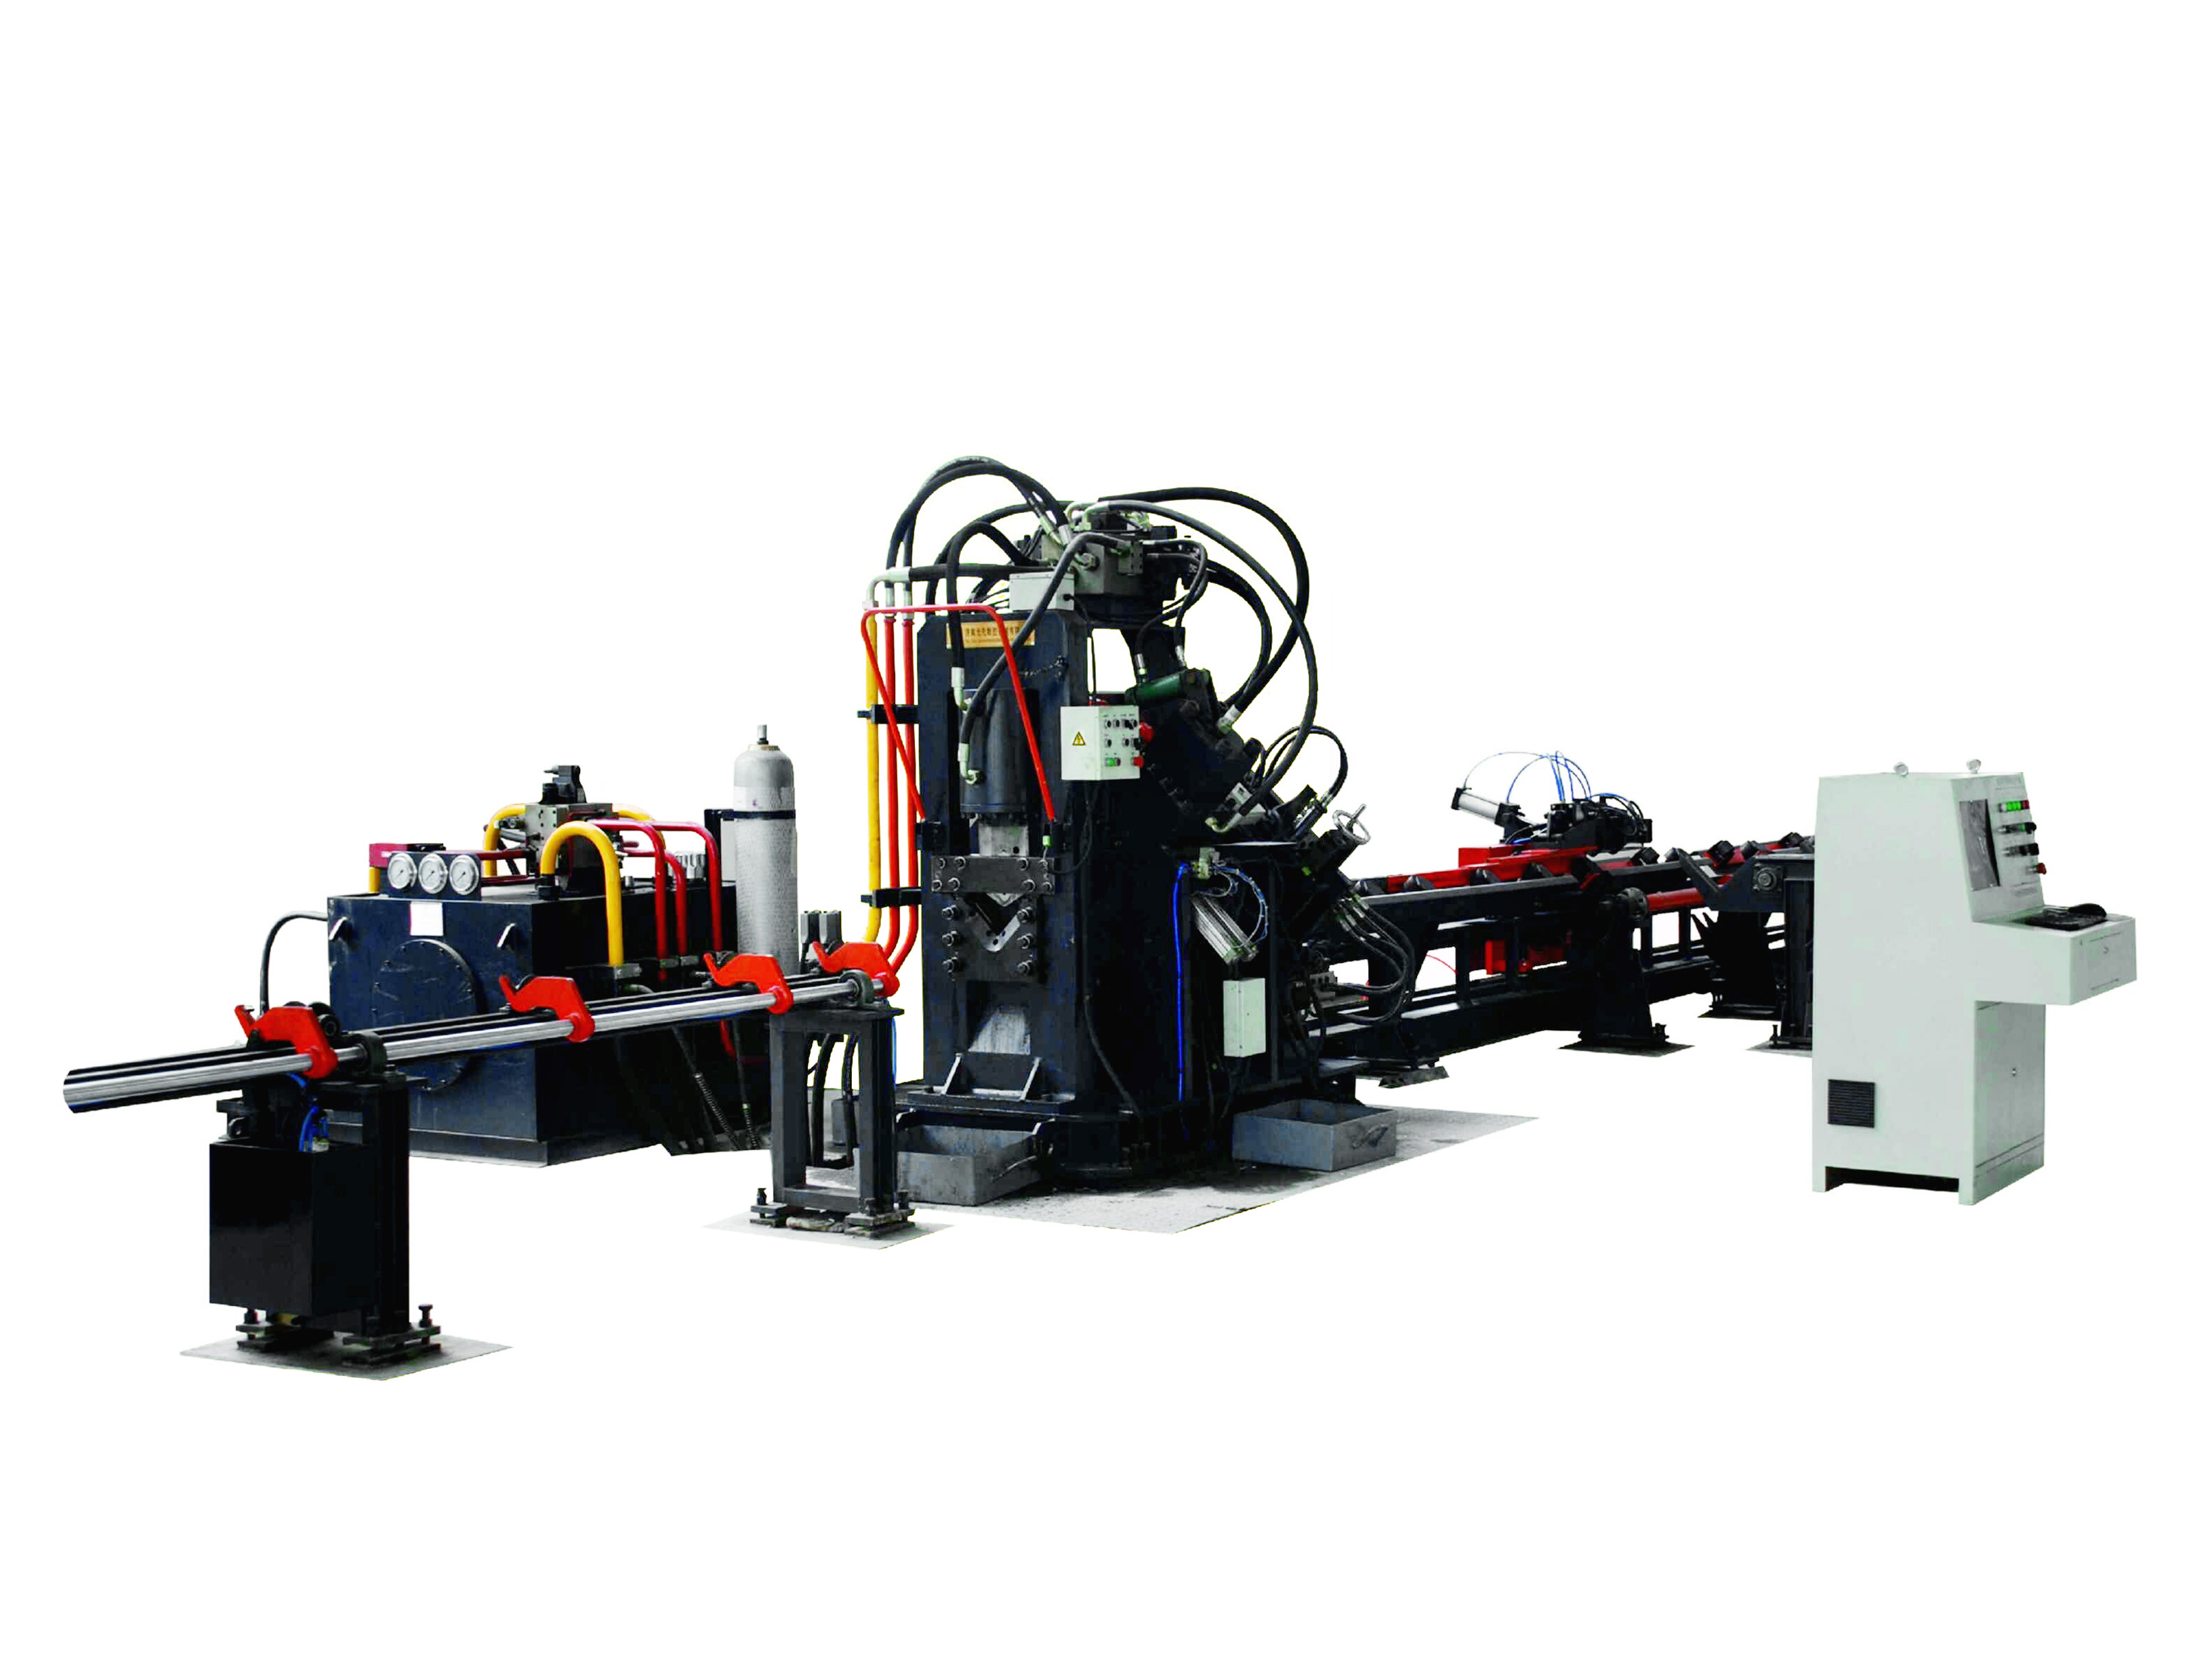 JNC1616 type high-speed CNC angle steel punching and cutting production line